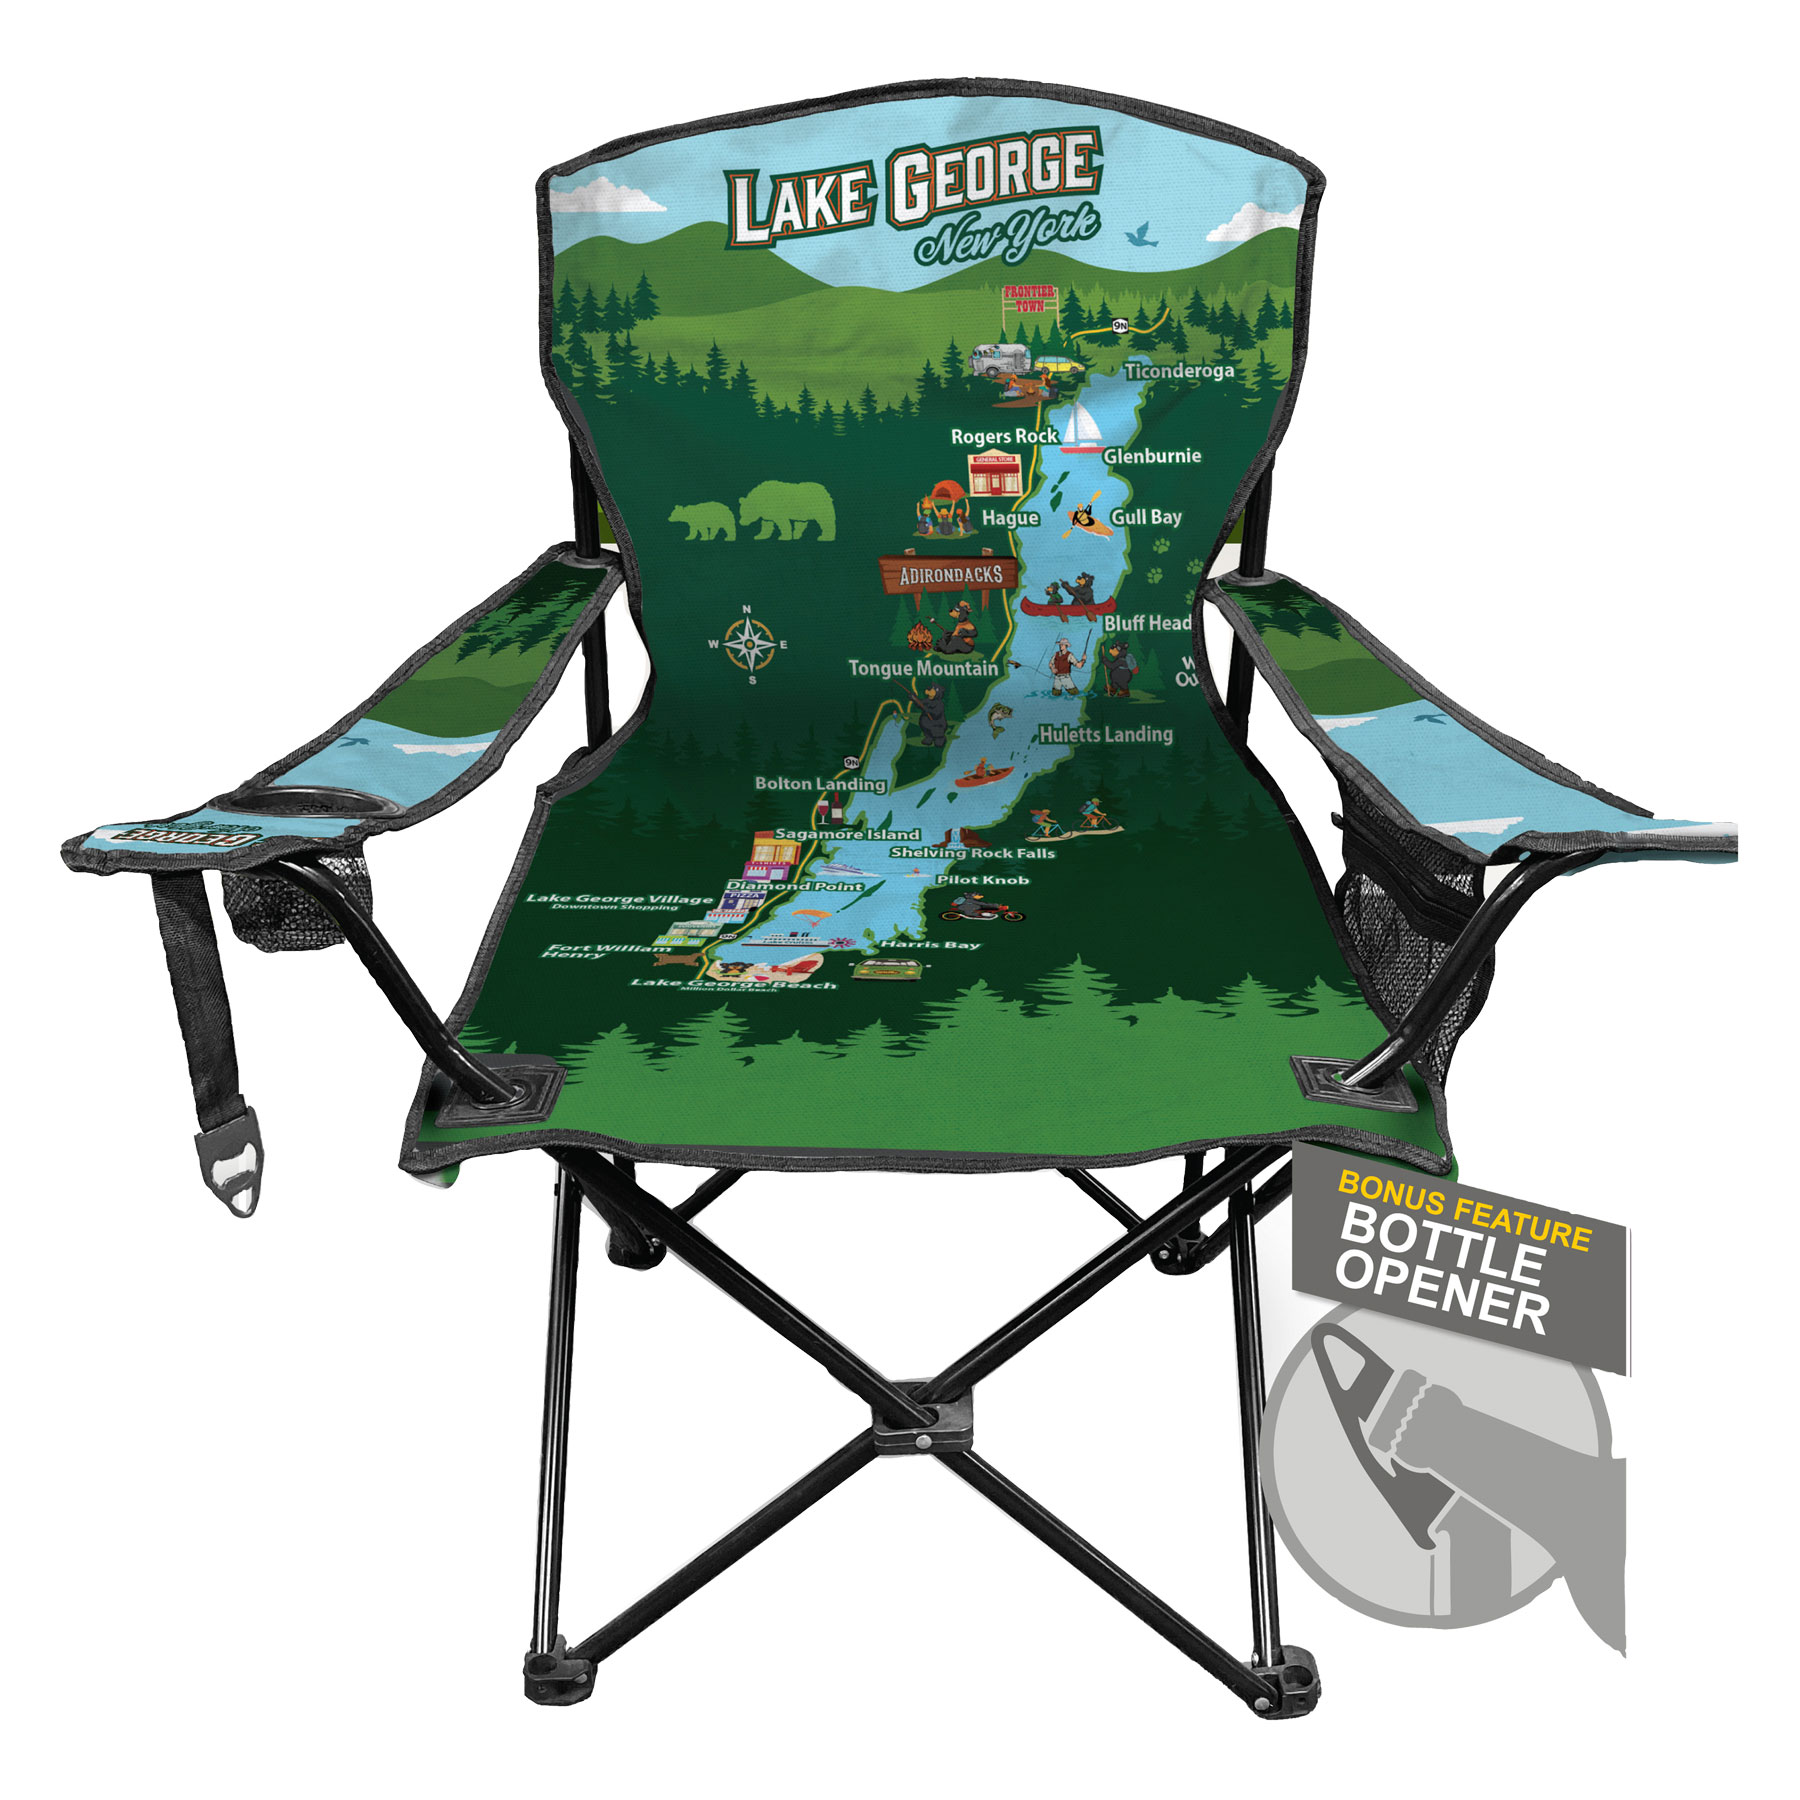 LAKE GEORGE MAP ADULT ARM CHAIR